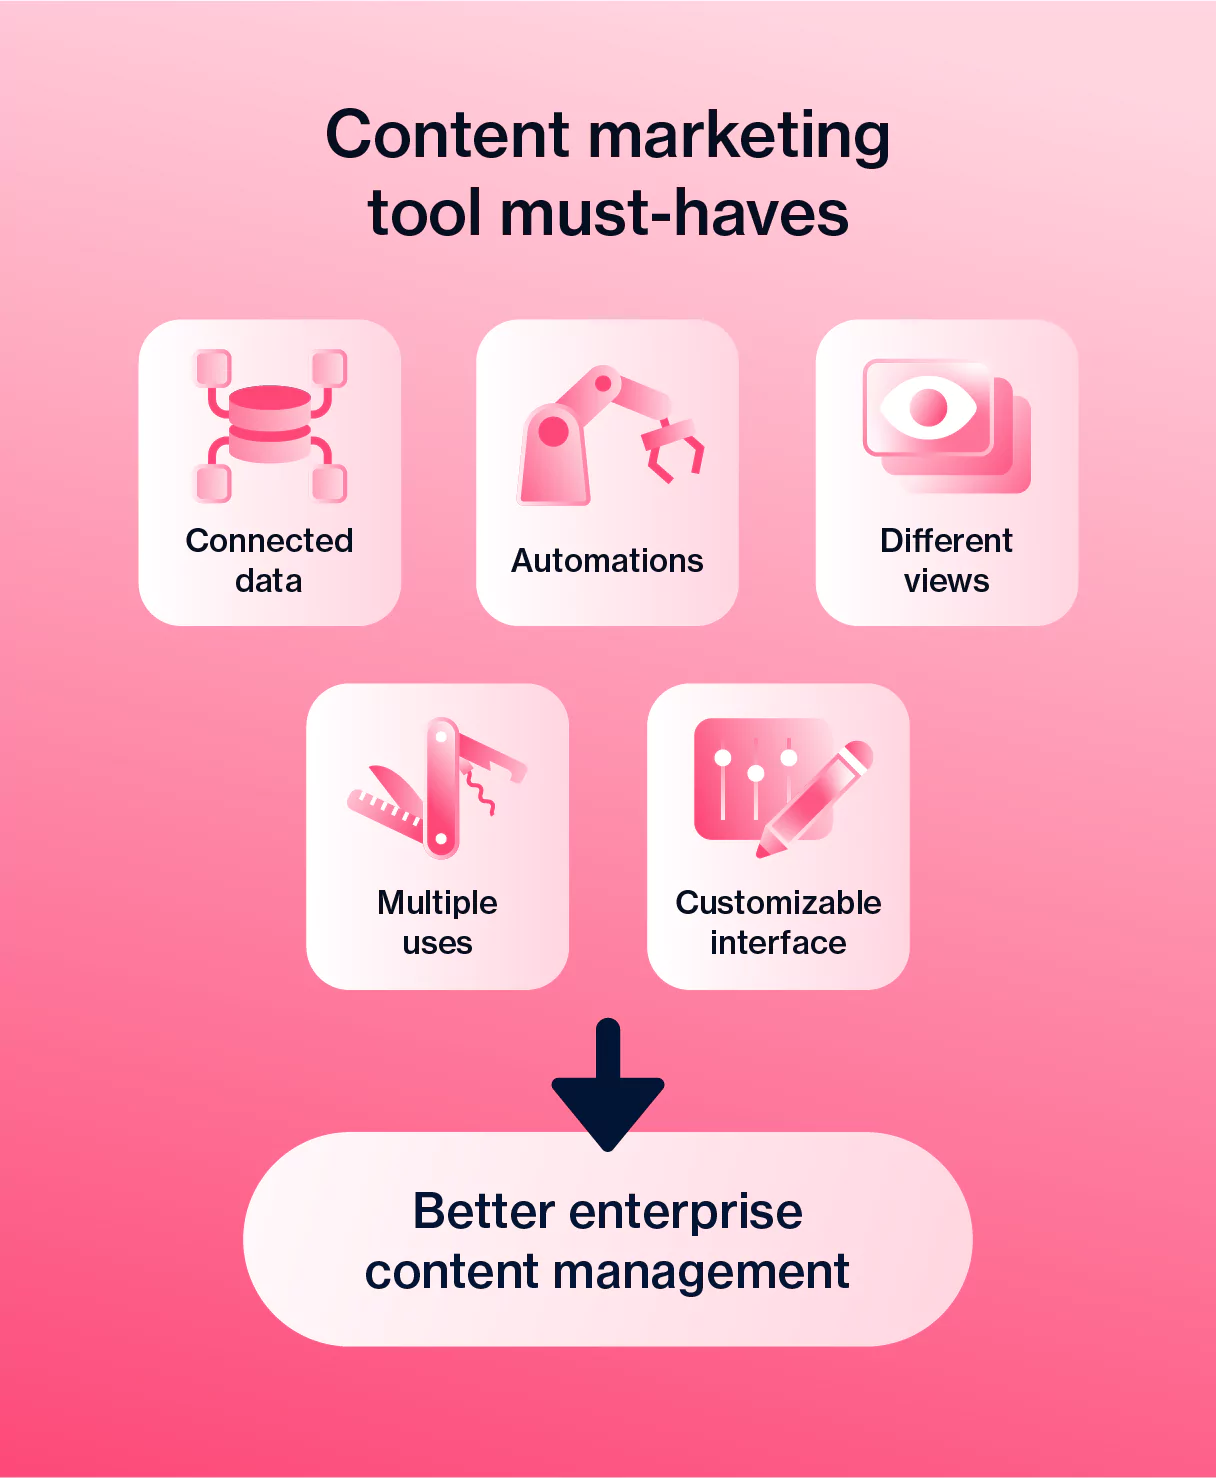 Graphic that shows content marketing tools must-haves for better enterprise content marketing management